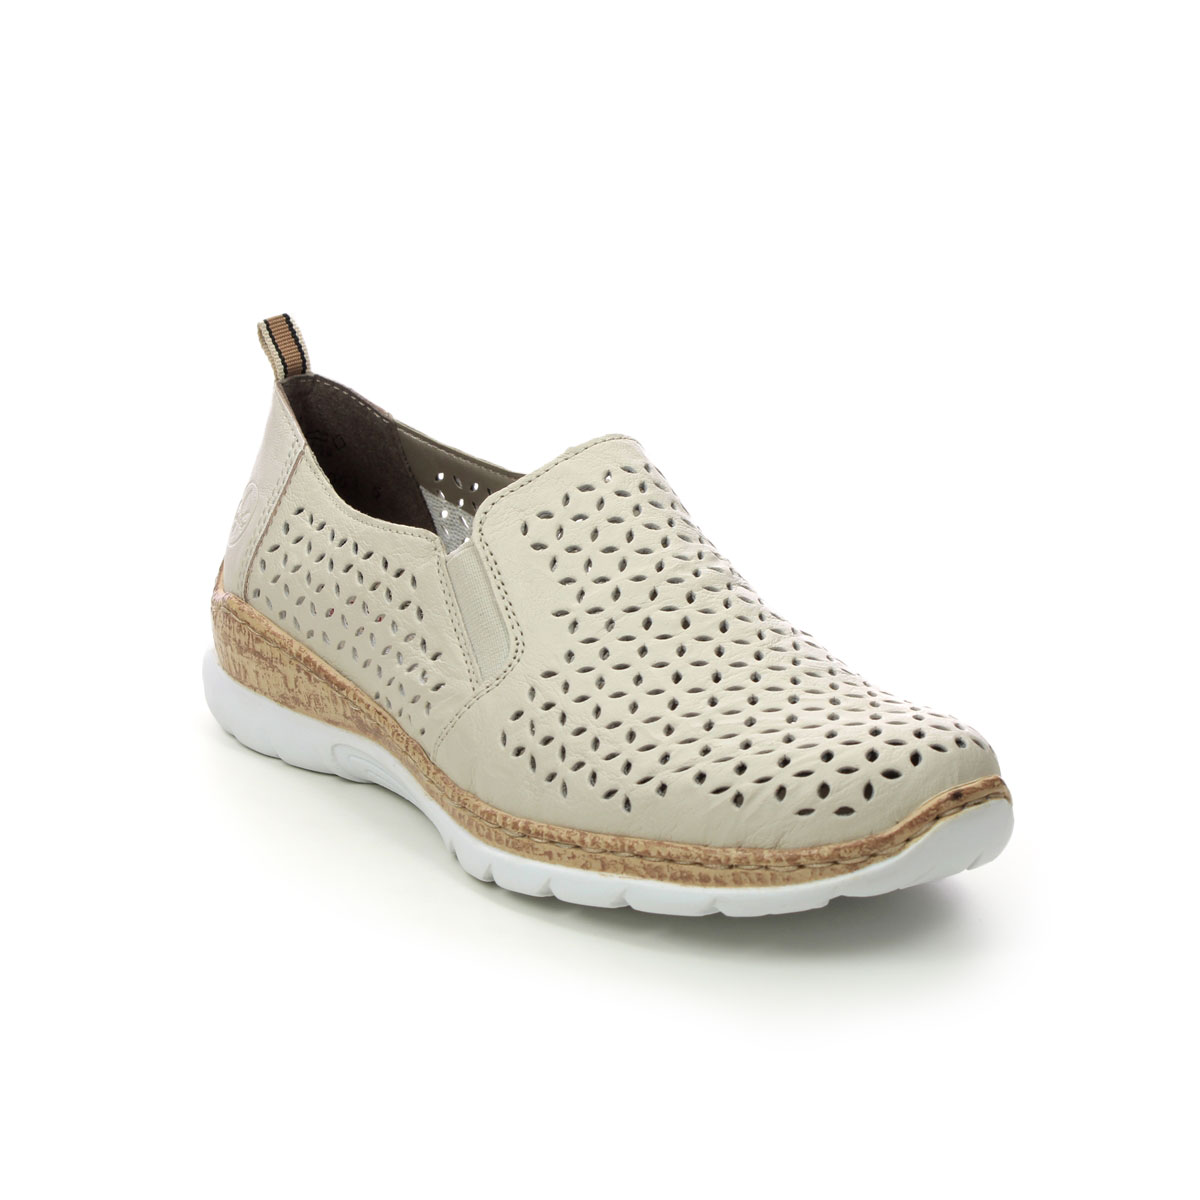 Rieker Empilucco Off White Leather Womens Comfort Slip On Shoes N4251-60 In Size 39 In Plain Off White Leather